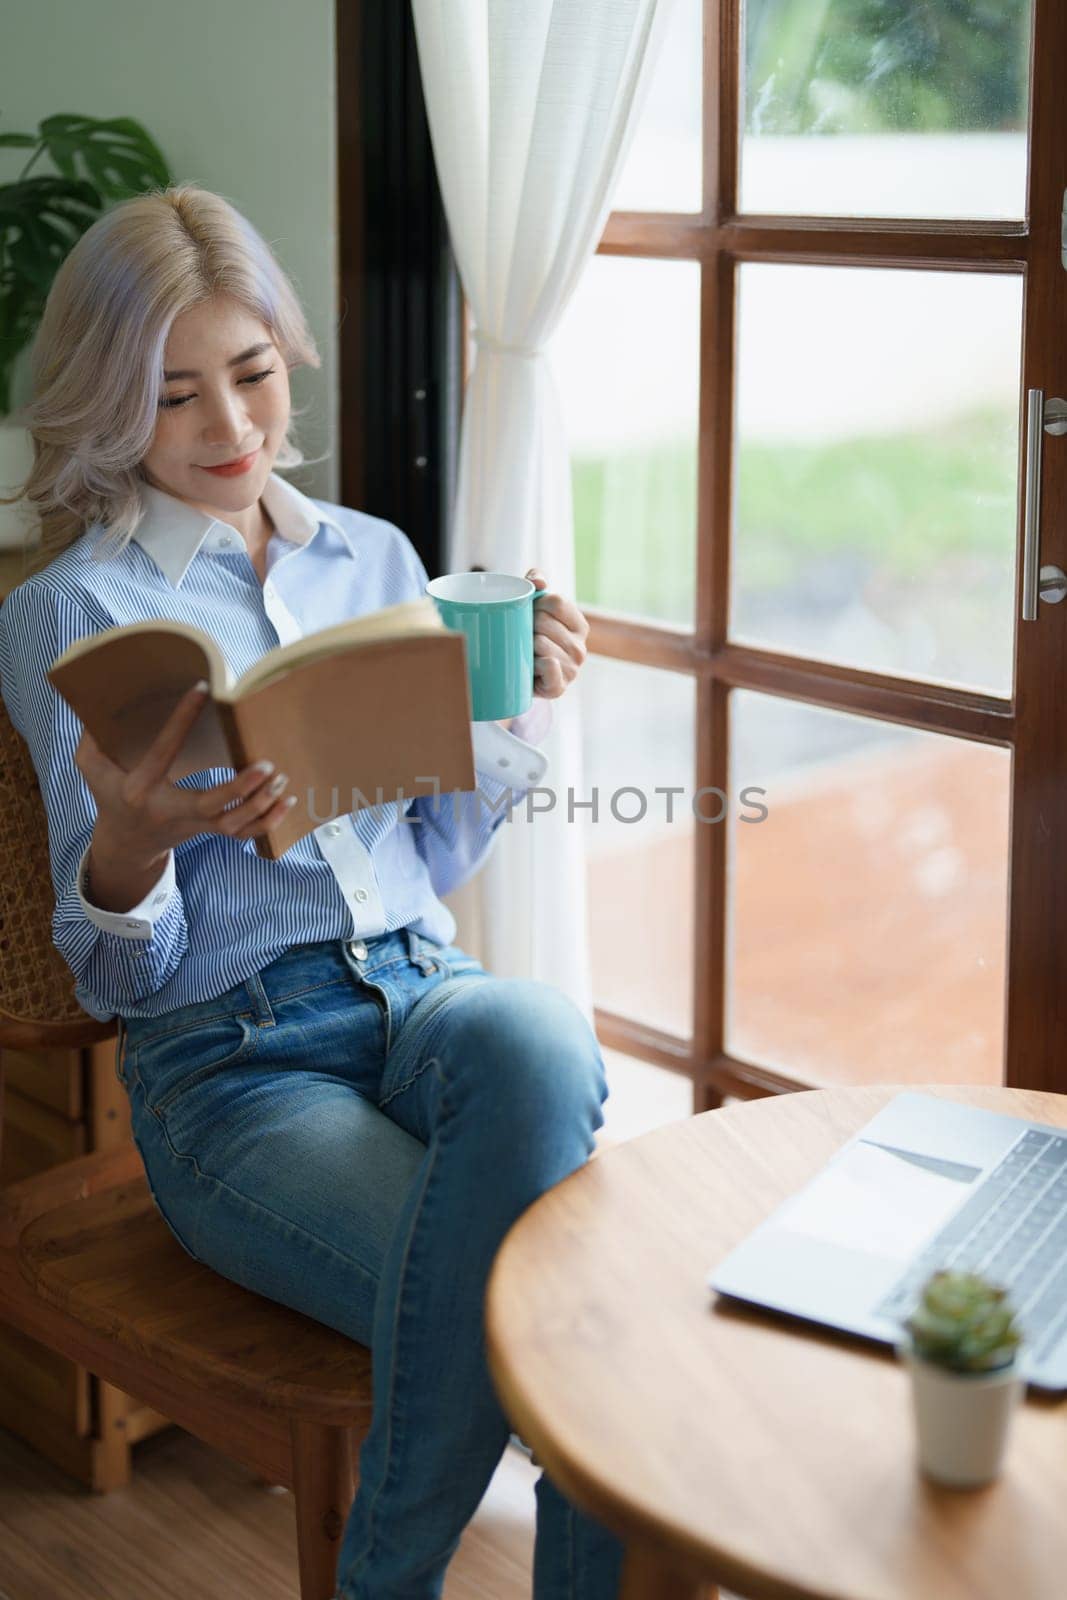 Portrait of an Asian business woman drinking coffee while reading book with a computer on her desk.